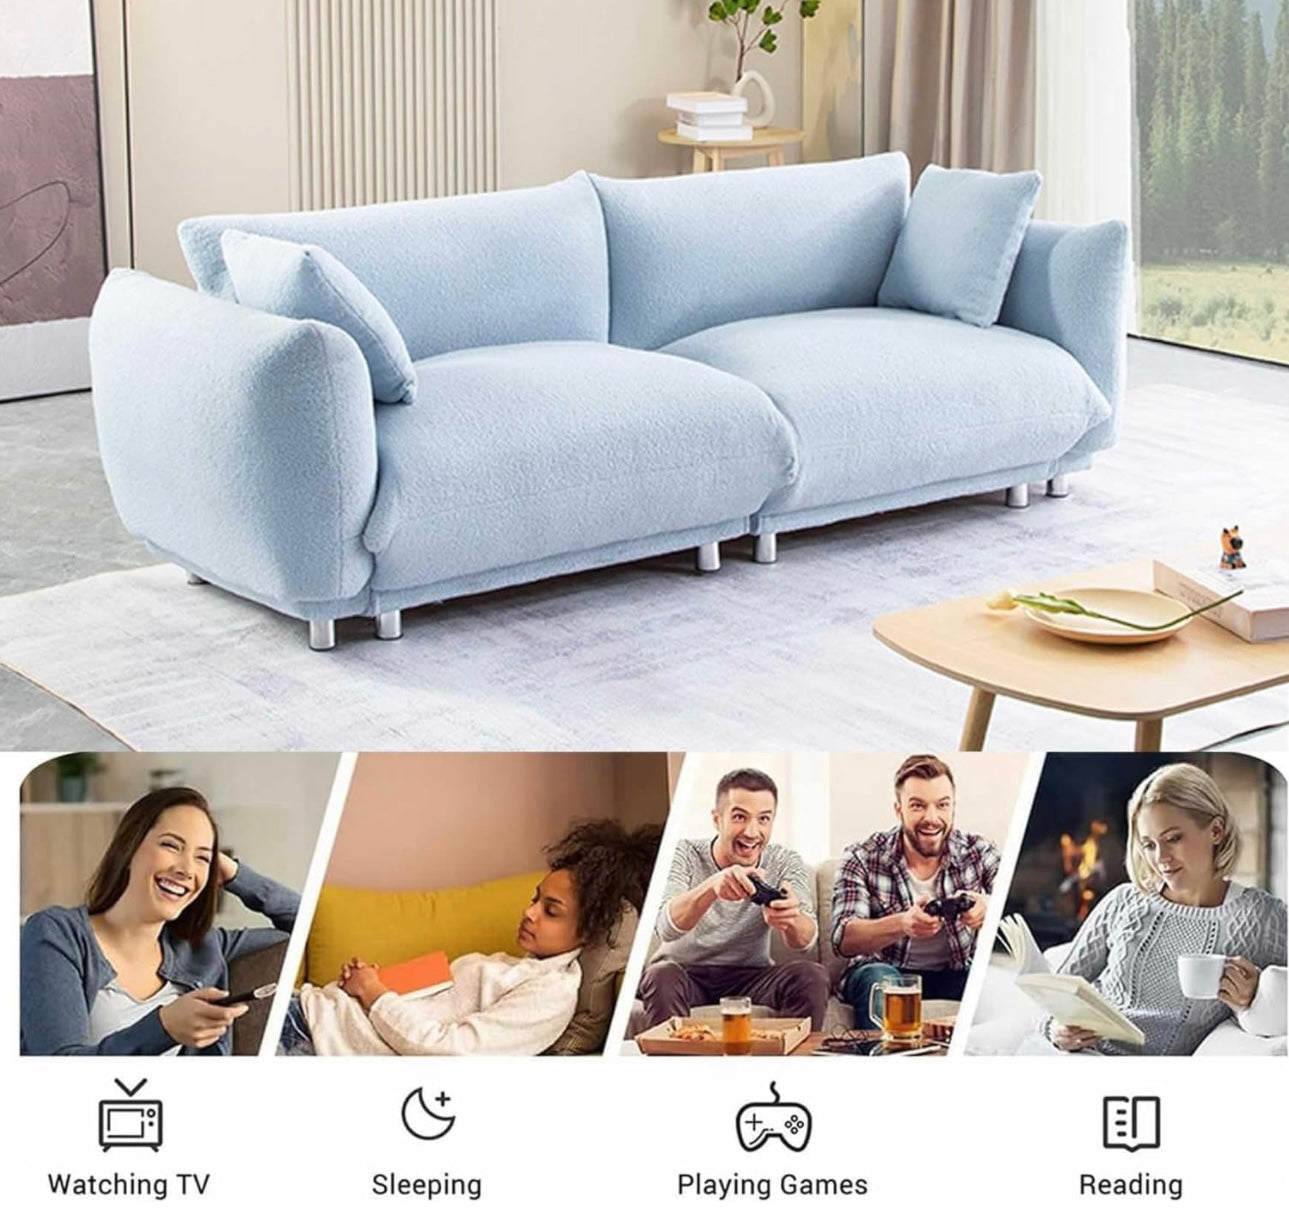 87 inch Modern Sofa, Teddy Comfy Sofa Couch with 2 Pillows, Upholstered Deep Seat Sofa, Oversized Sofa with Metal Legs for Small Space Office Apartments Bedroom Living Room (Blue)